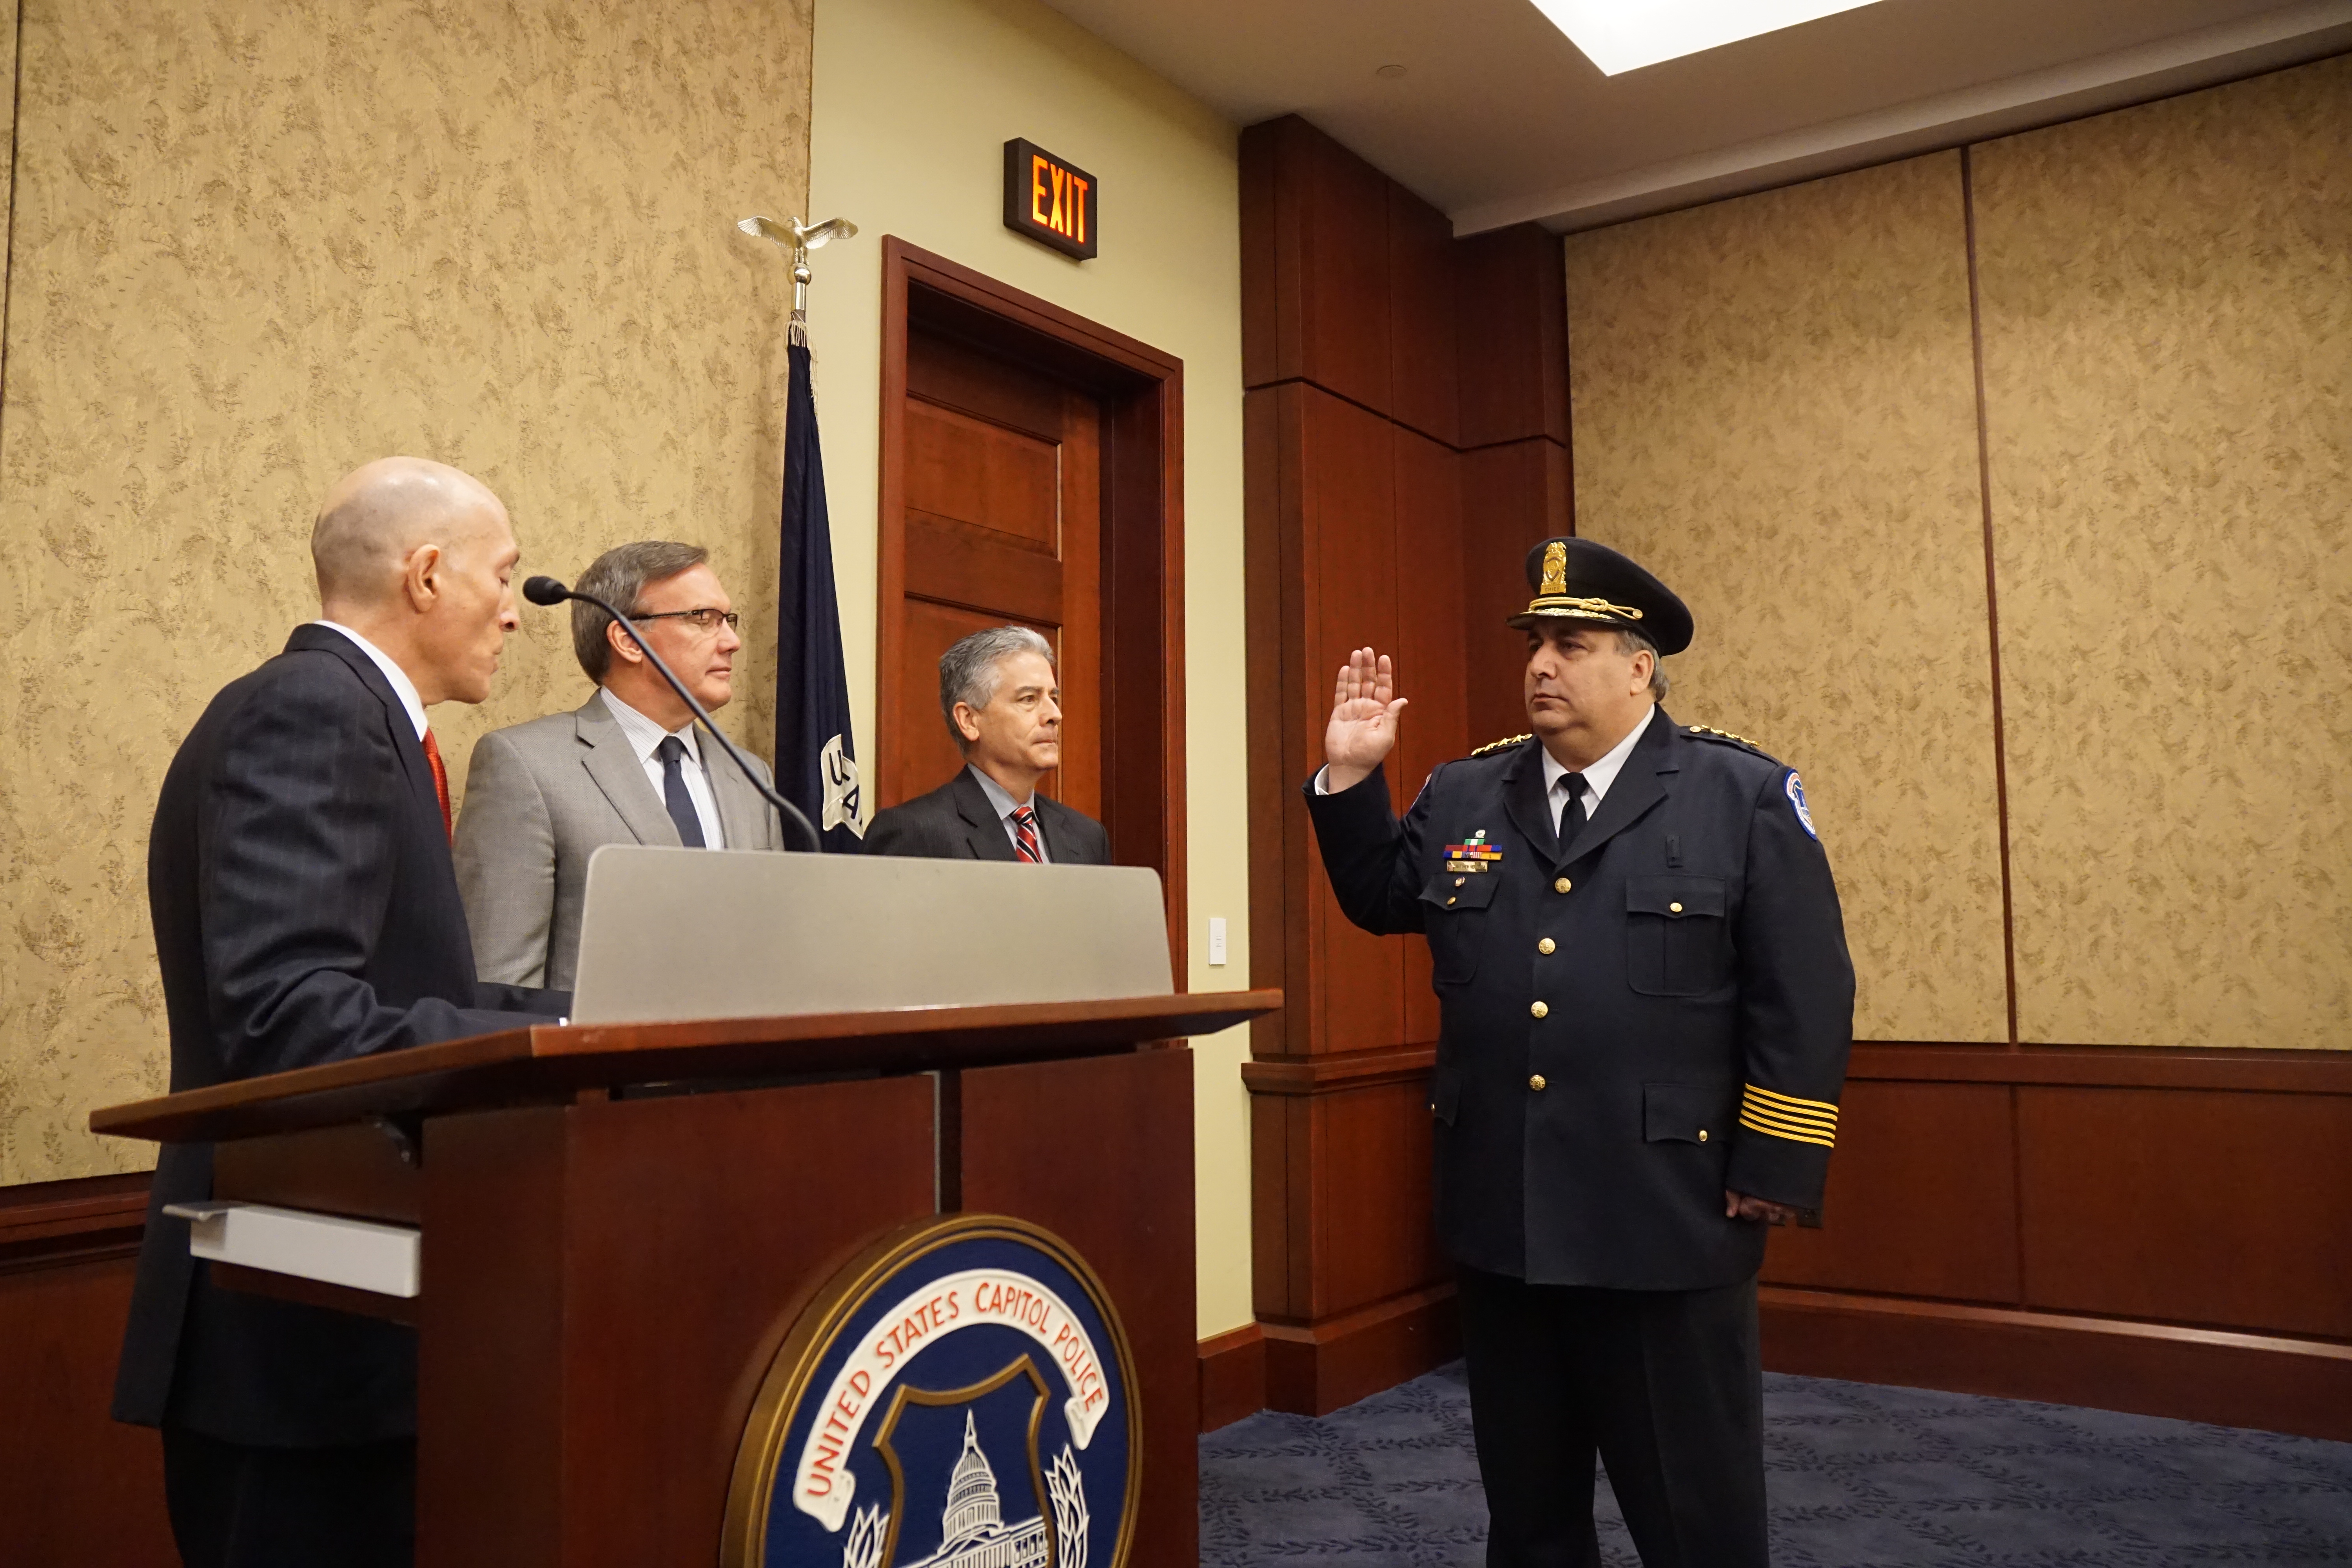 New leader at the helm of U.S. Capitol Police